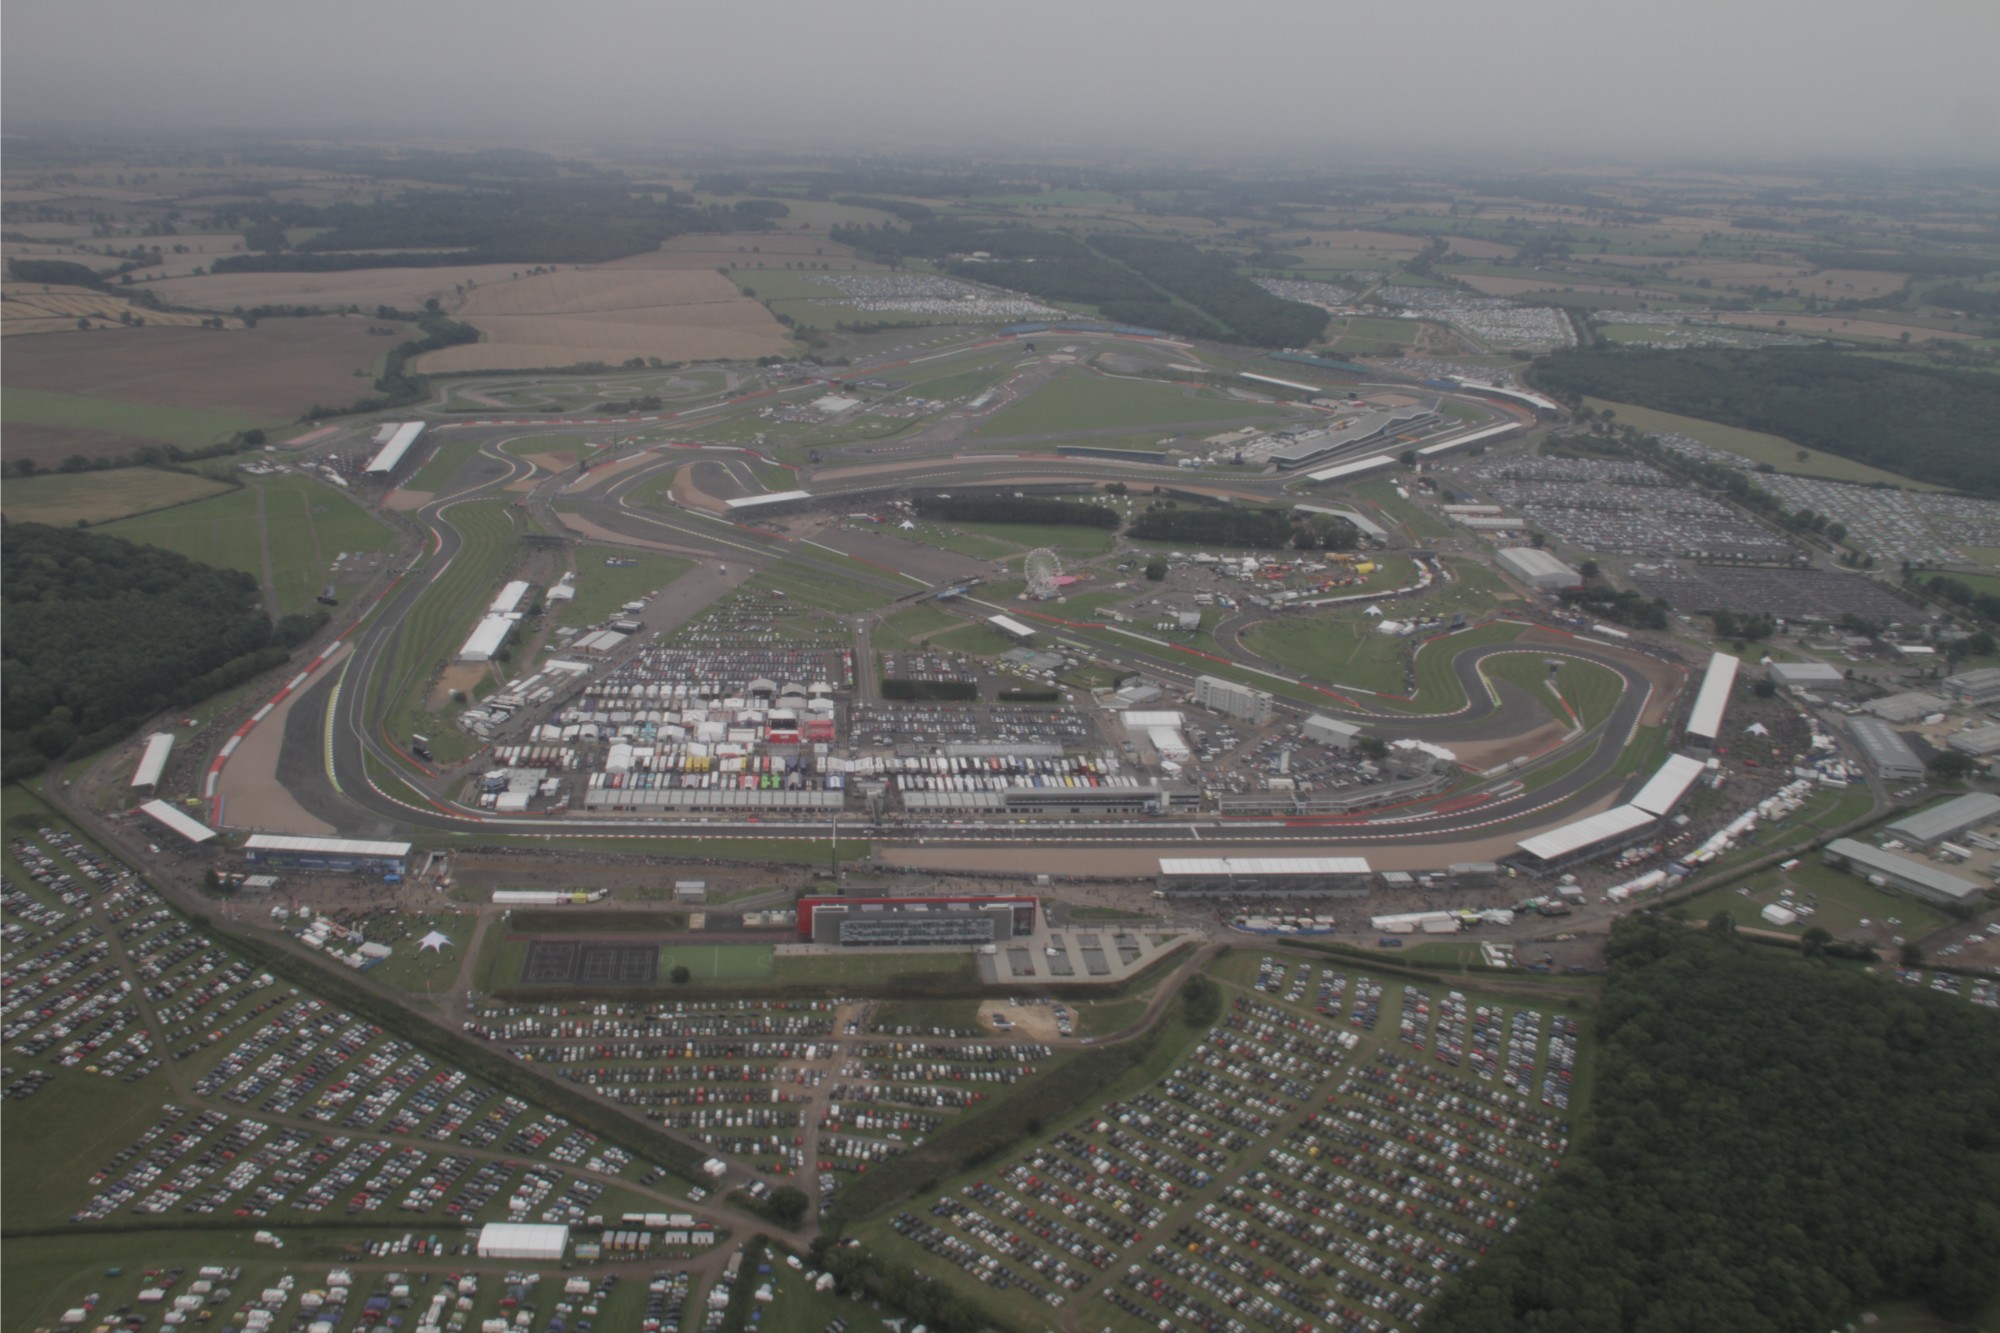 MotoGP beIN SPORTS Announces Its Broadcast Schedule For The British Grand Prix From Silverstone